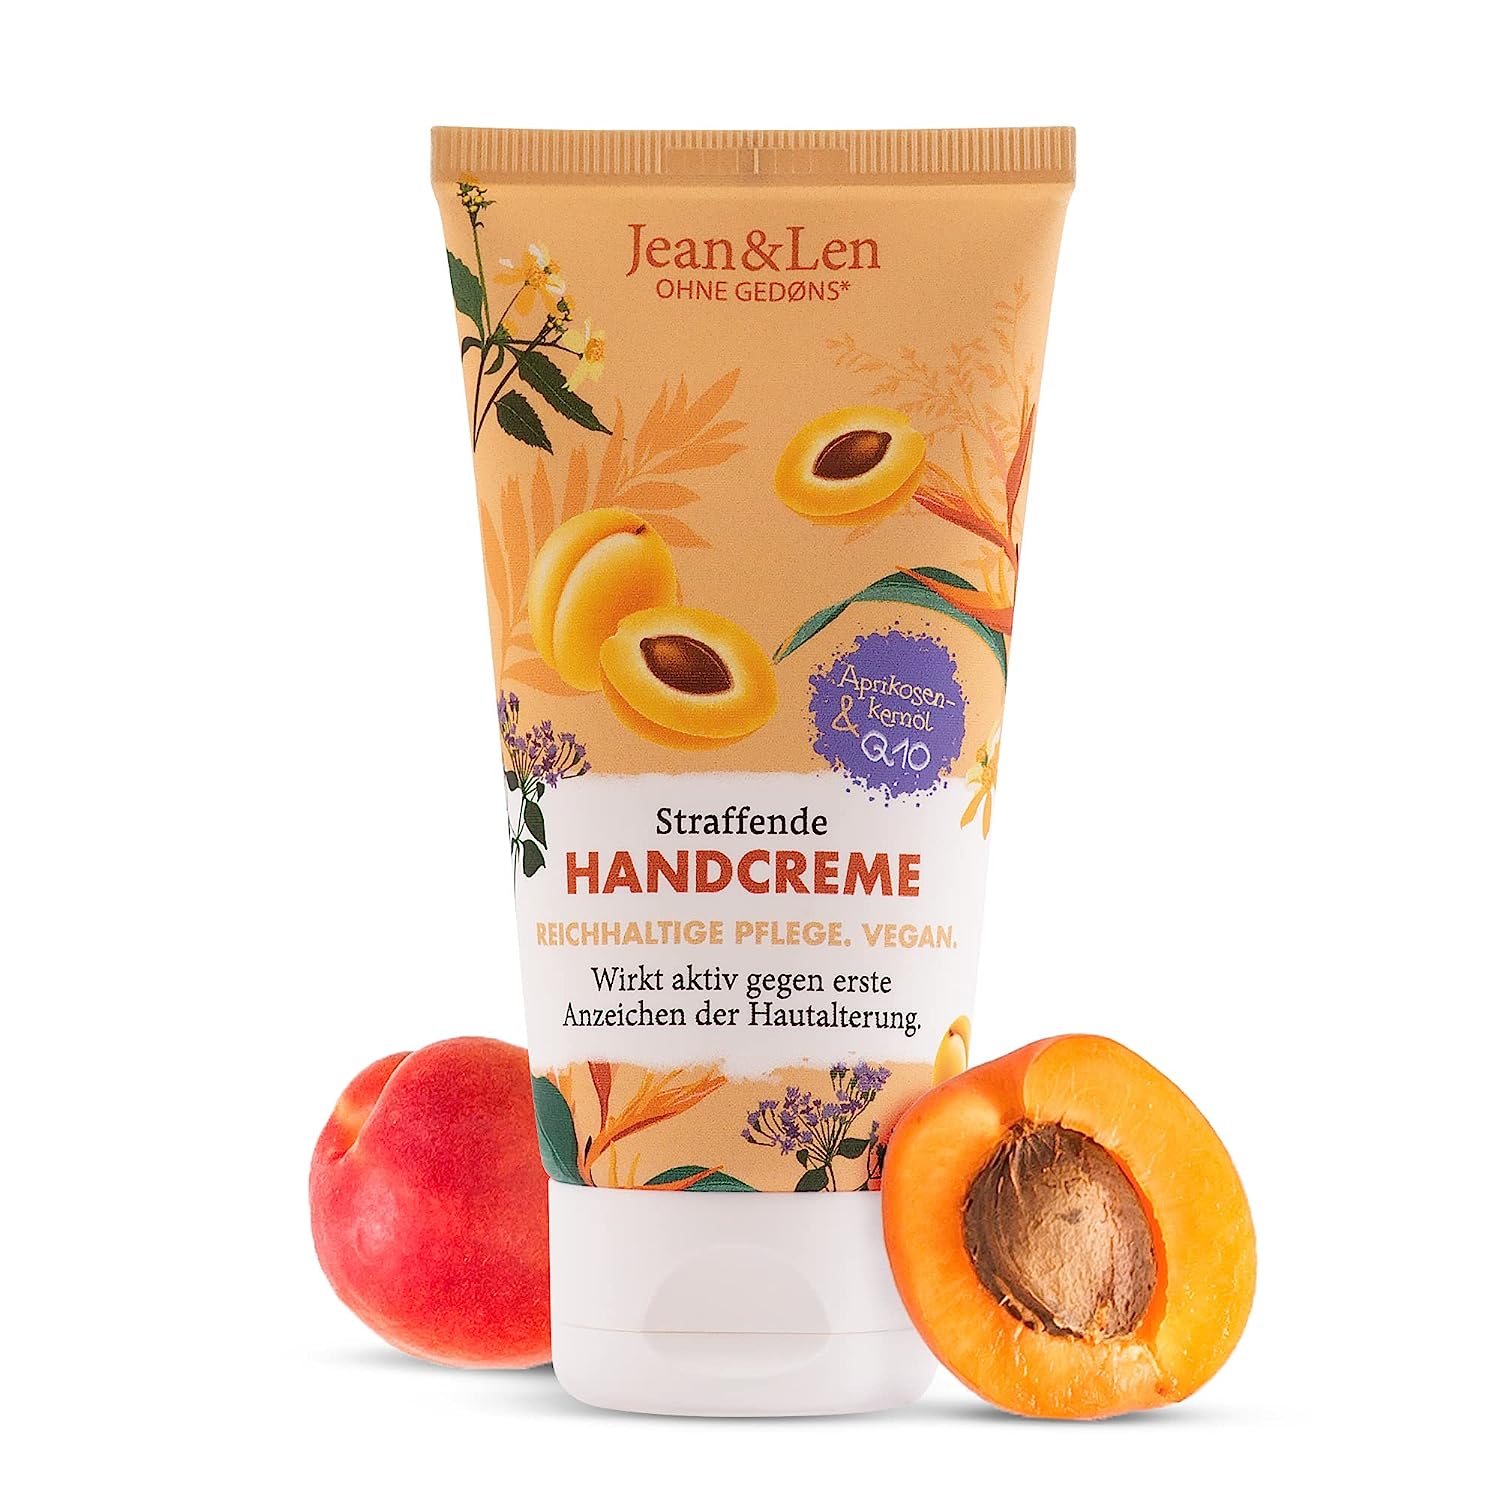 Jean & Len Firming Hand Cream Apricot Sernel Oil / Q10, Rich Care, Actively Against First Signs of Skin Aging, For Dry Hands, Paraben & Silicone, Hand Cream Tube, 75 ml